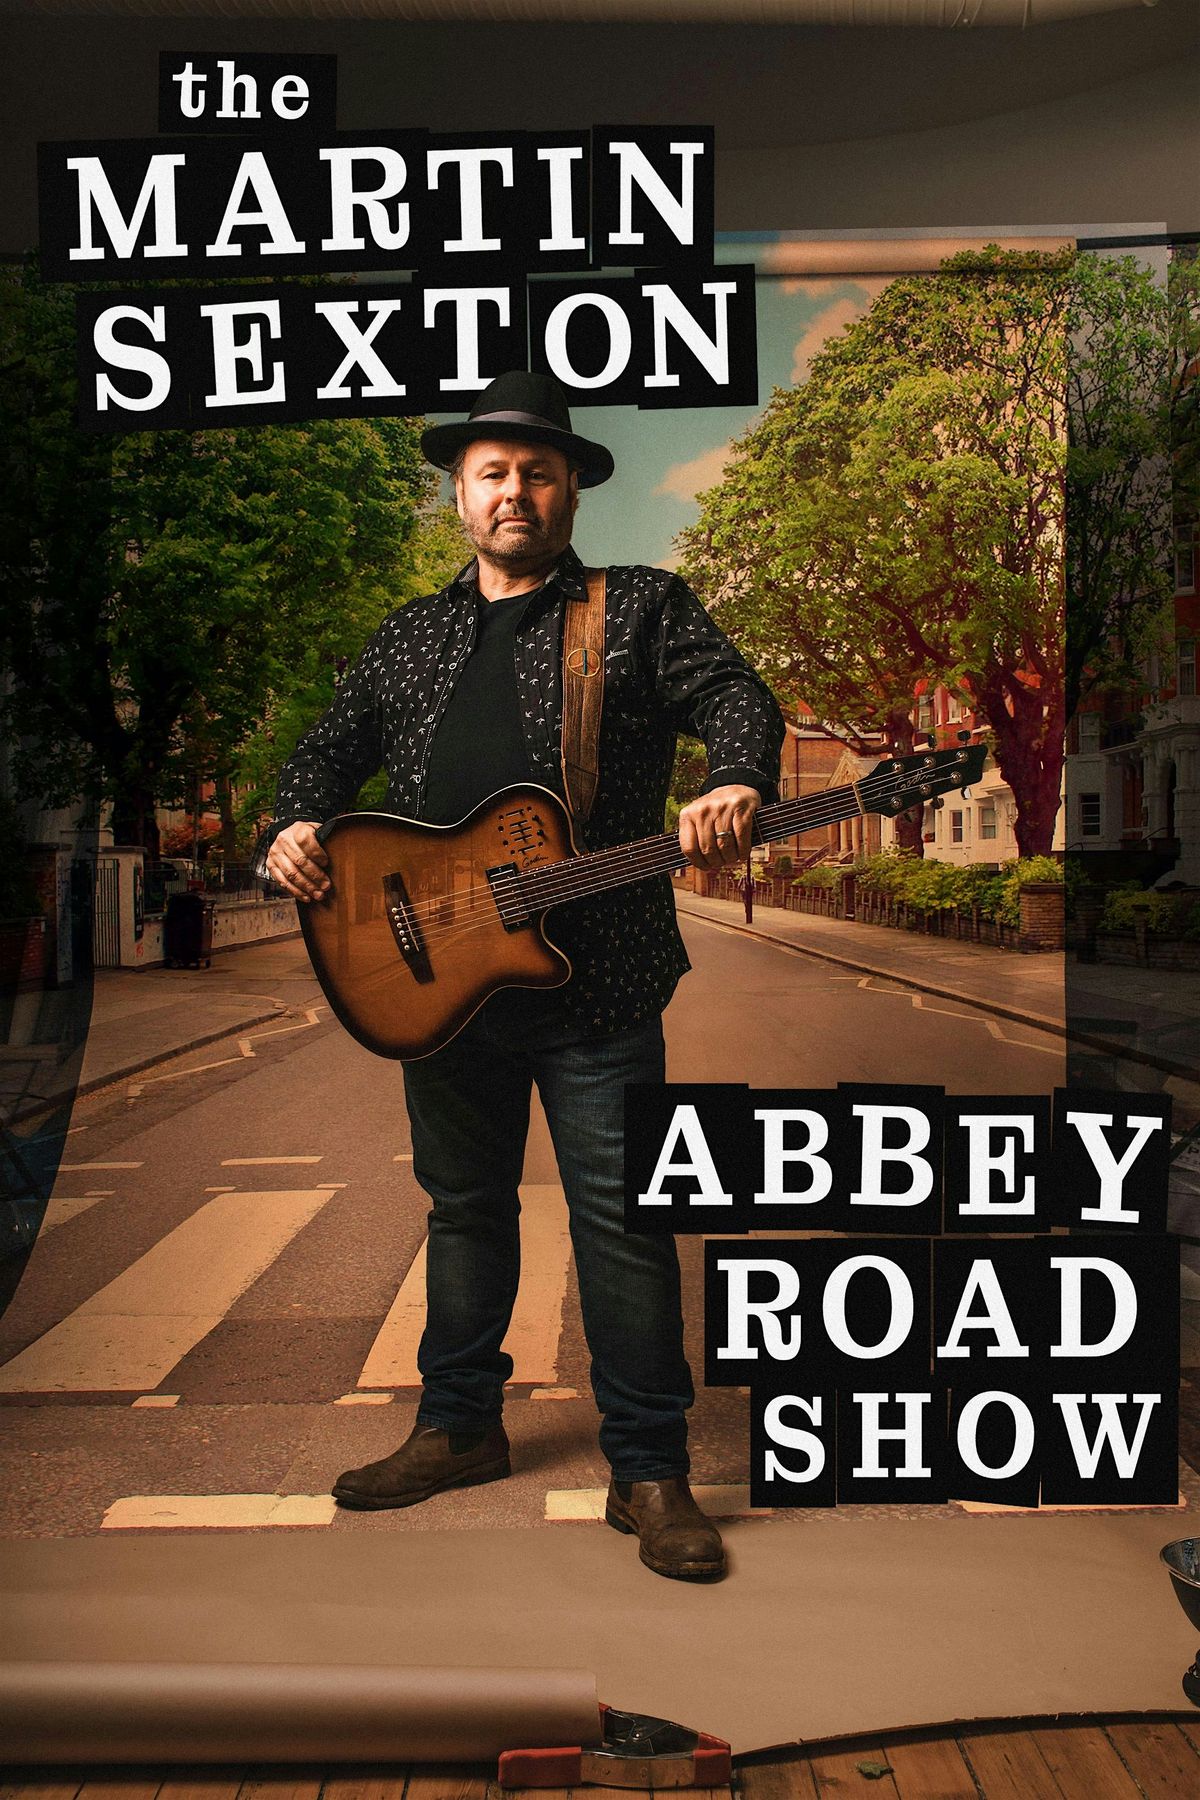 Greenhouse Productions Presents: The Martin Sexton Abbey Road Show